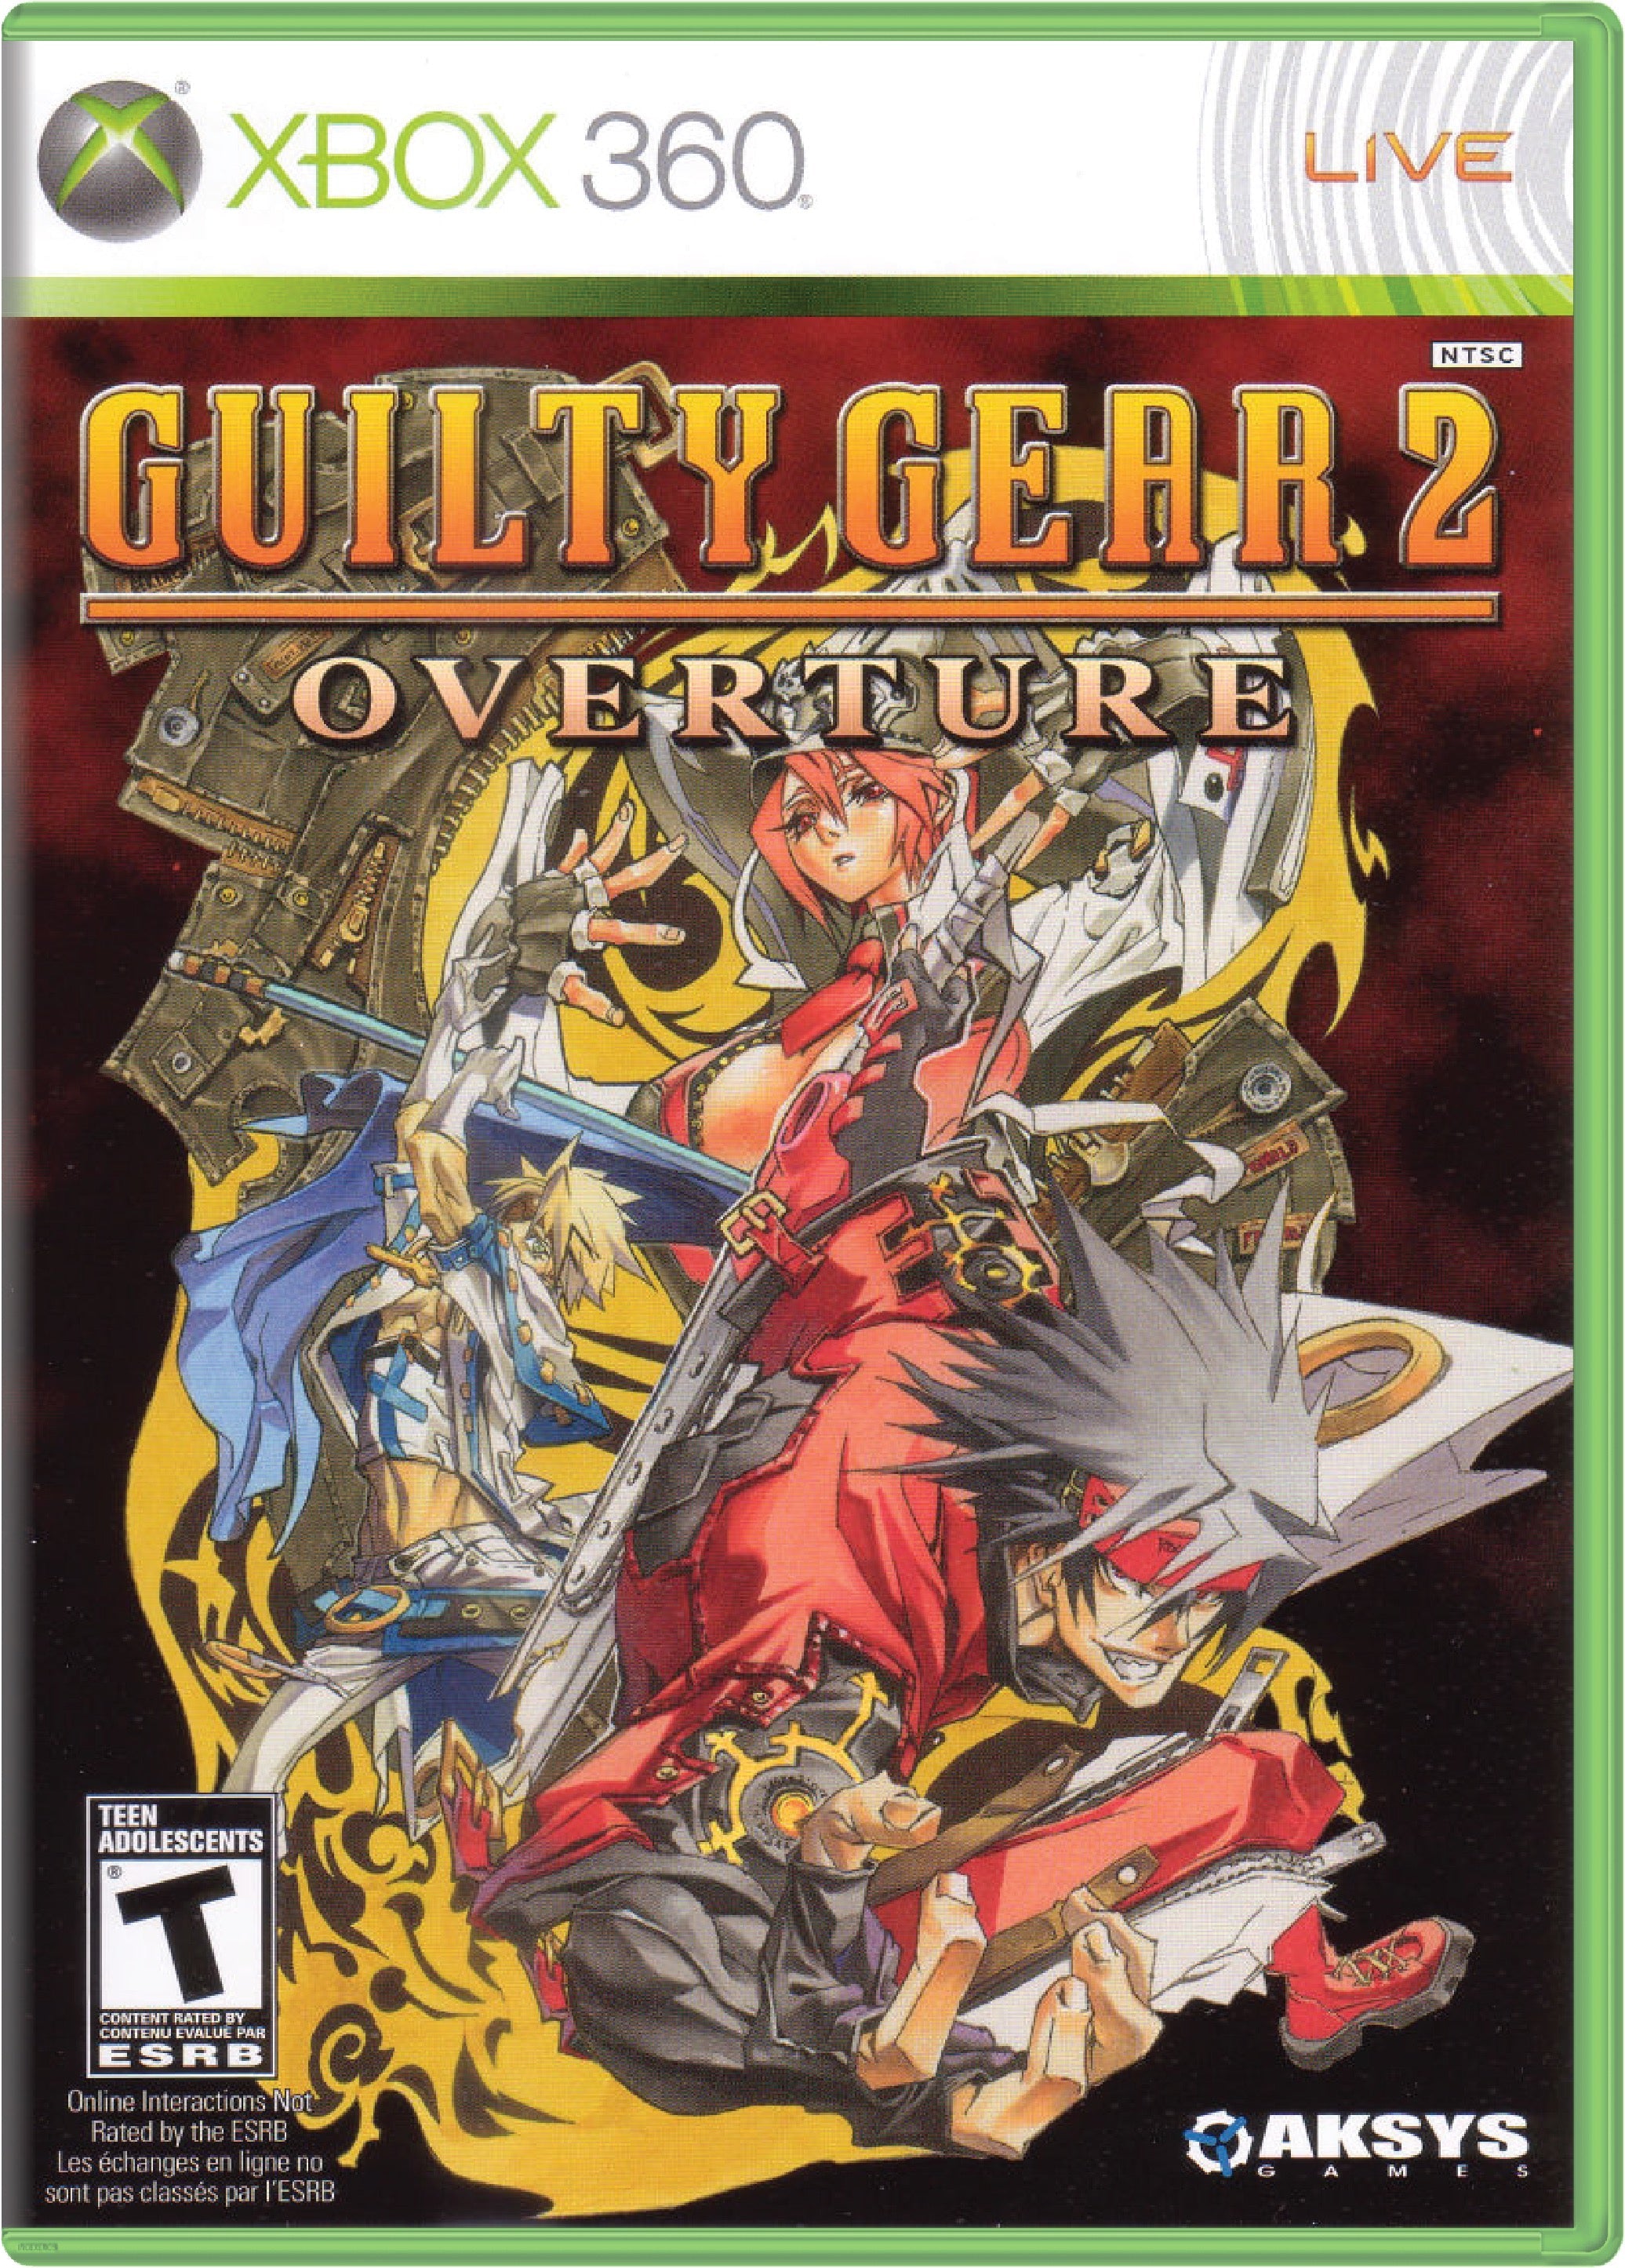 Guilty Gear 2 Overture Cover Art